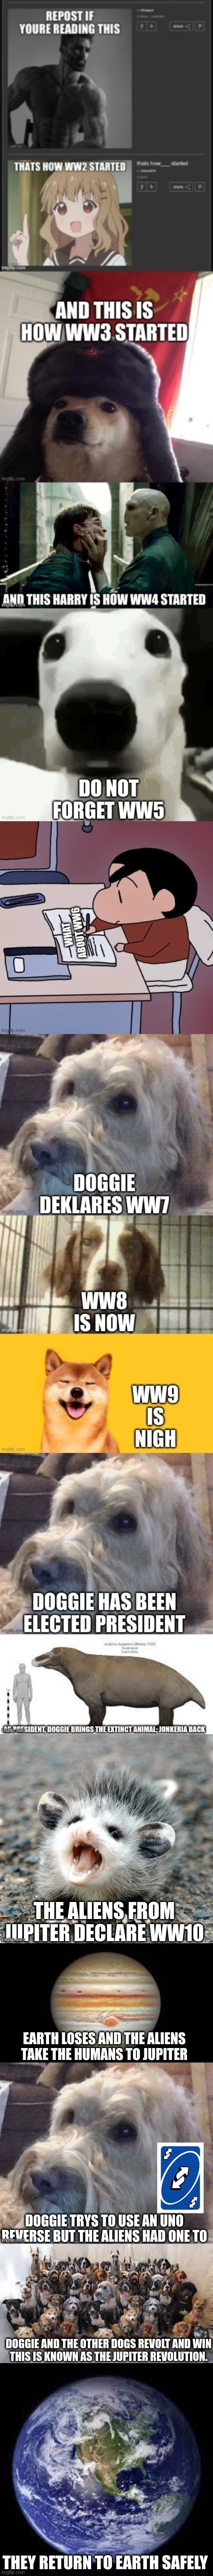 DOGGIE AND THE OTHER DOGS REVOLT AND WIN
THIS IS KNOWN AS THE JUPITER REVOLUTION. THEY RETURN TO EARTH SAFELY | made w/ Imgflip meme maker